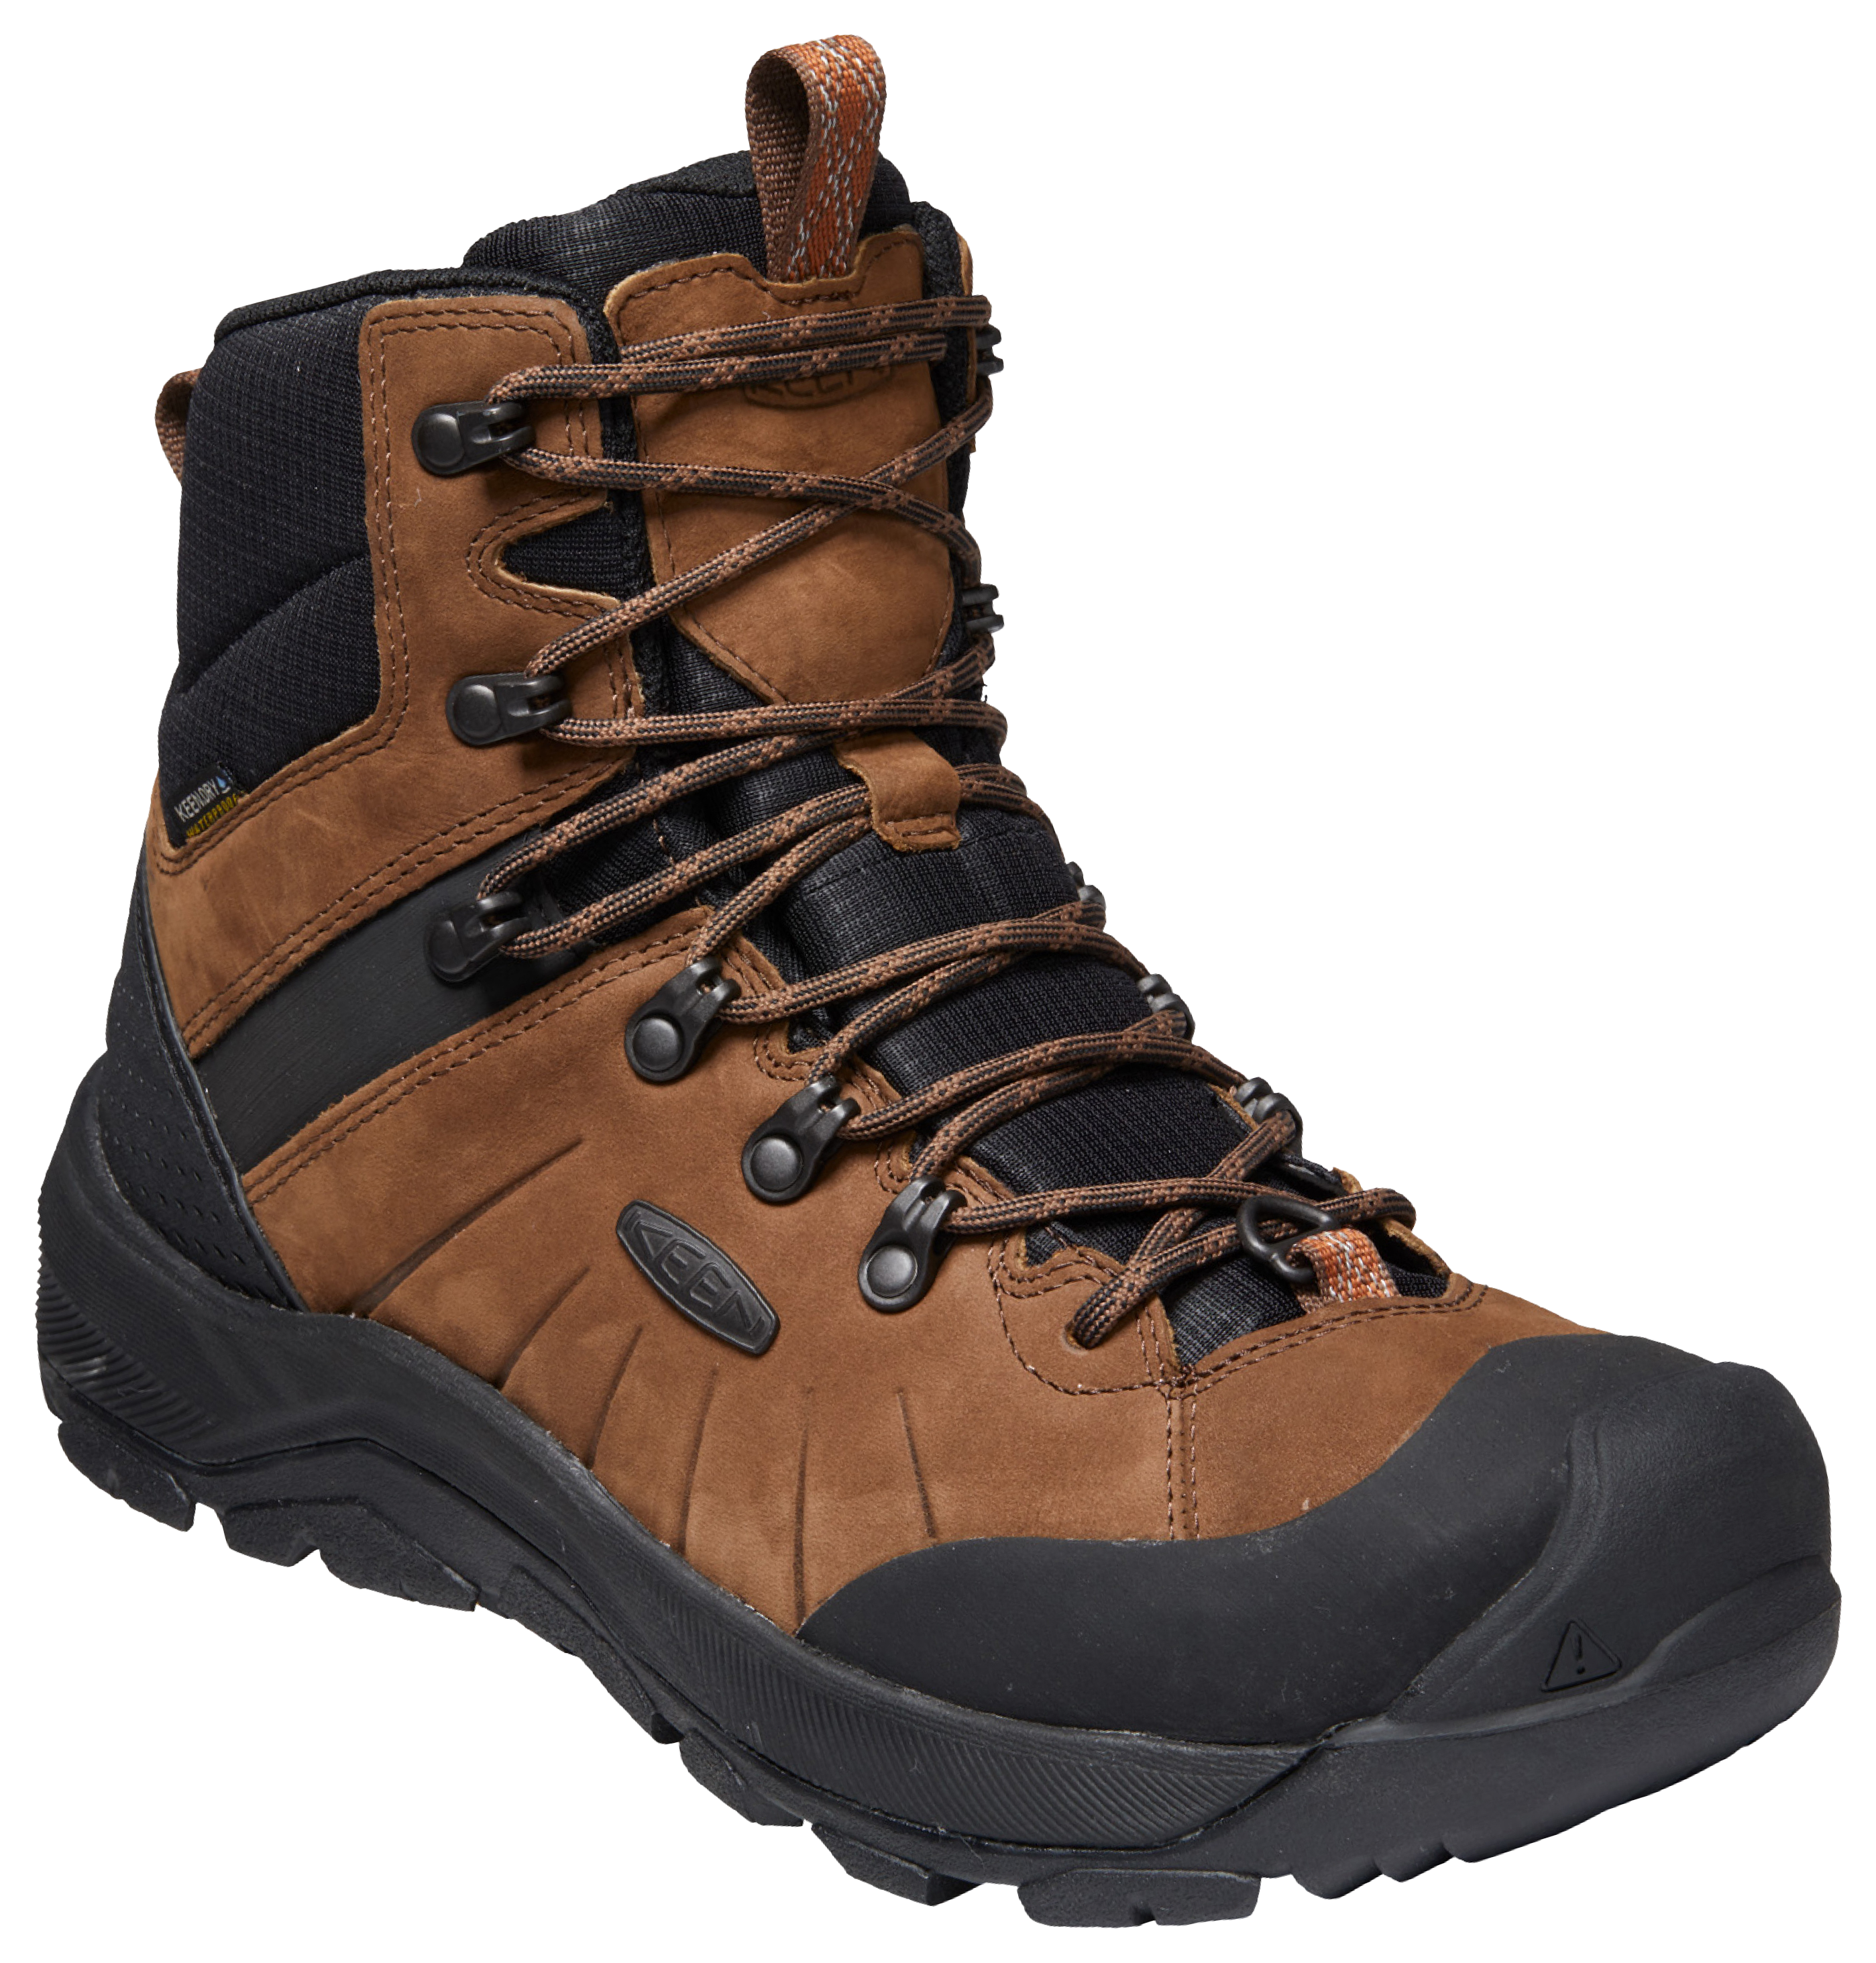 KEEN Revel IV Polar Insulated Waterproof Hiking Boots for Men